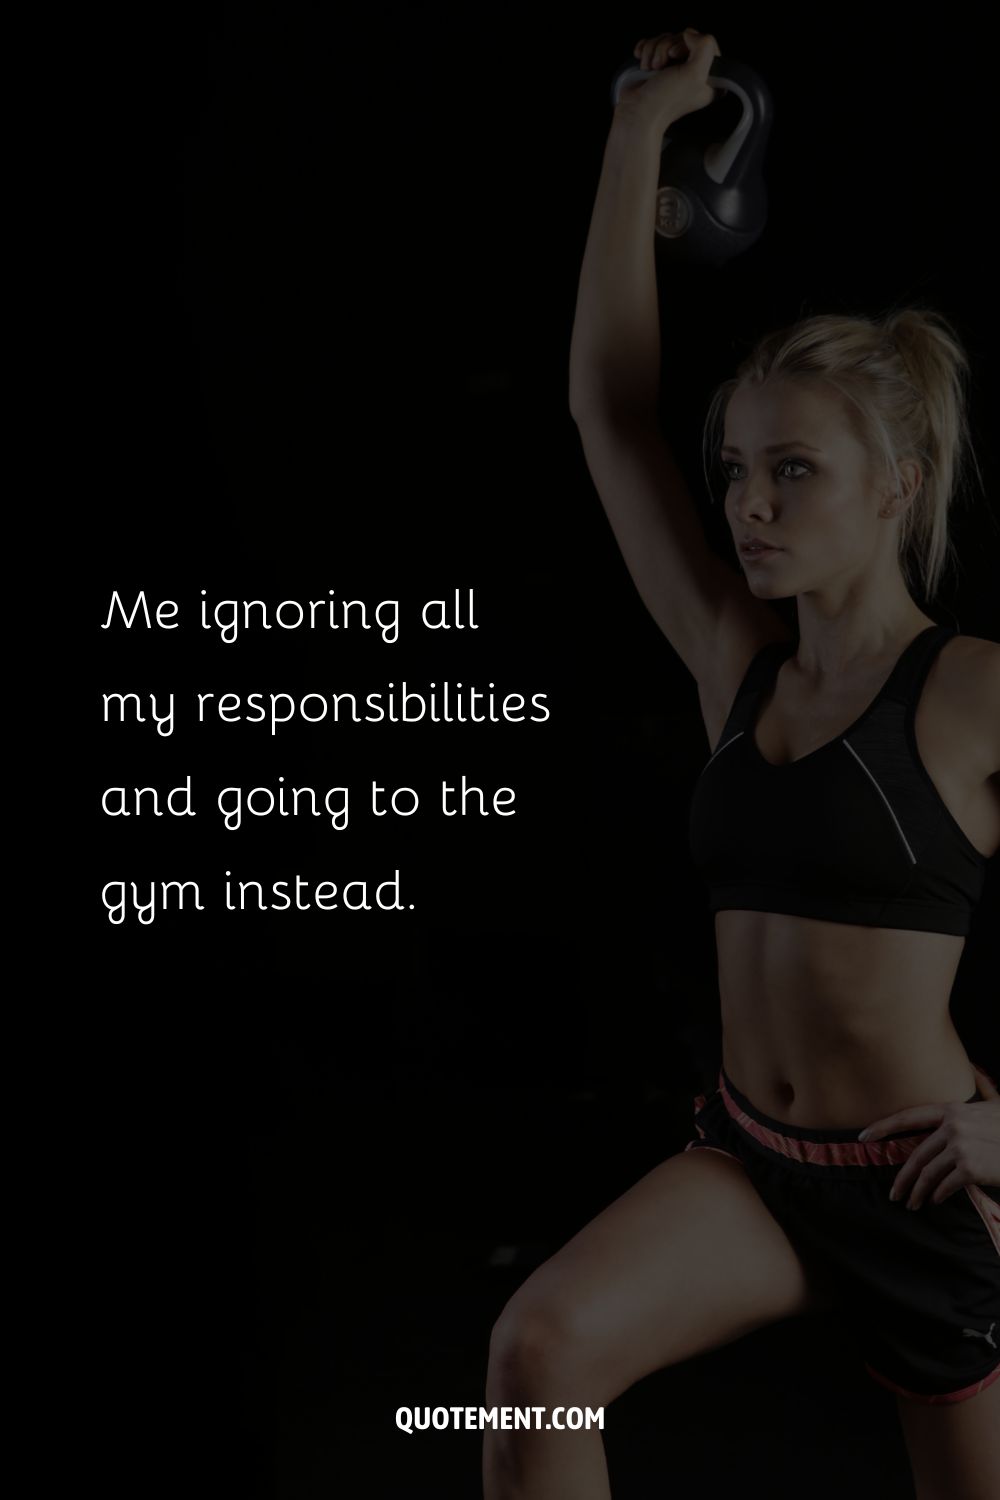 image of a girl working out representing gym quote for women